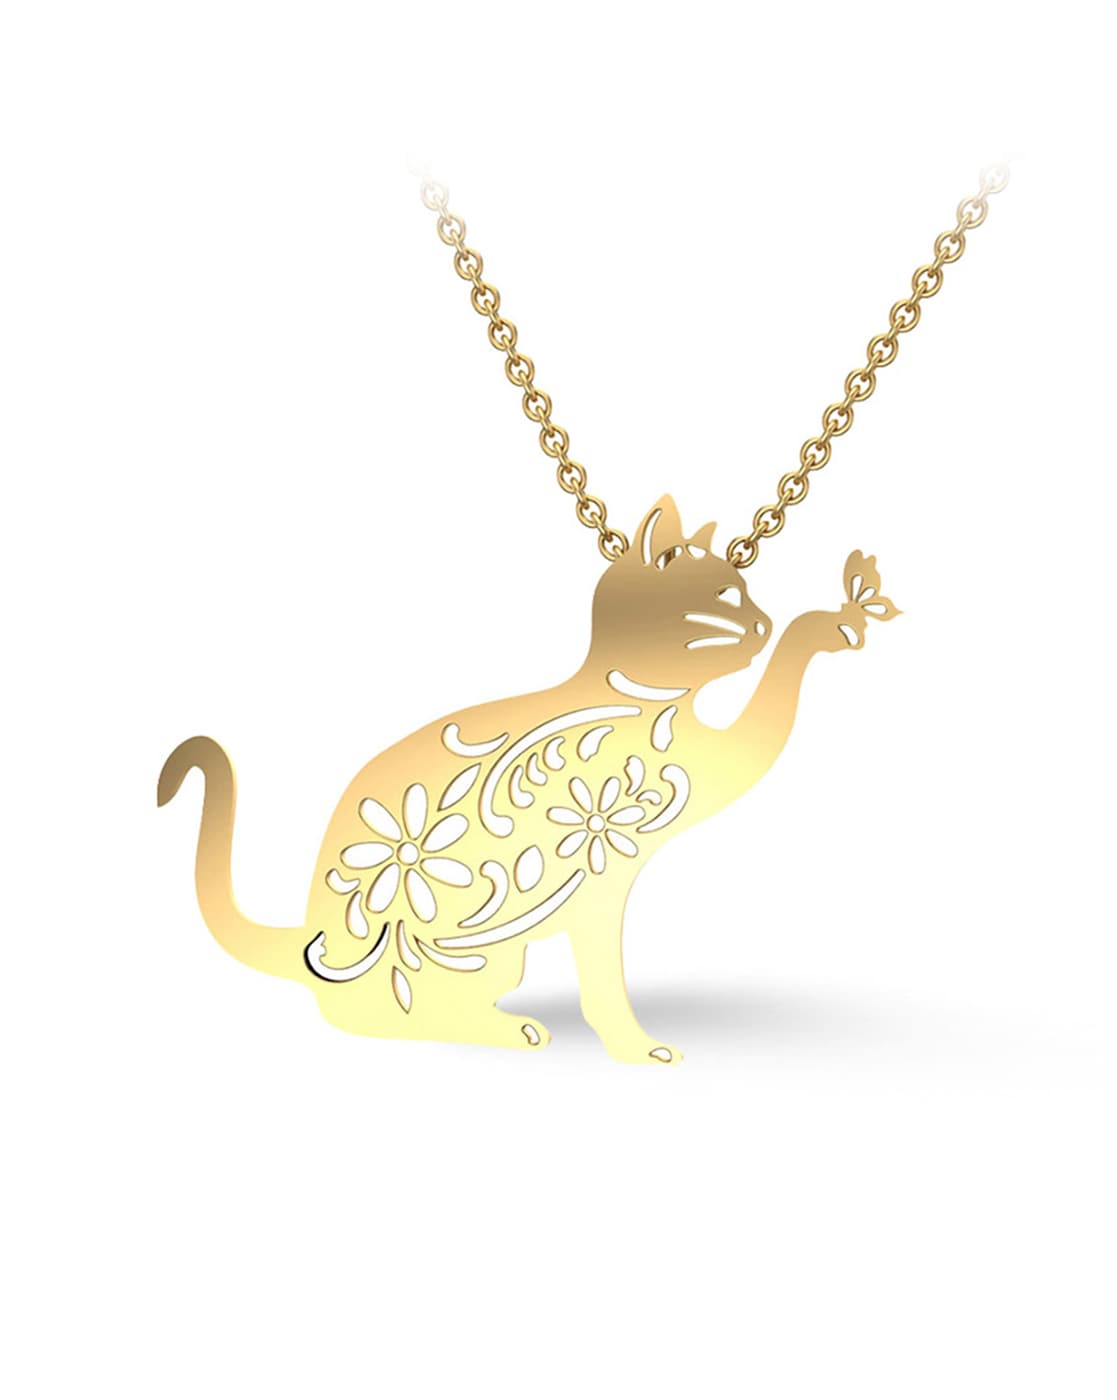 15 ct. t.w. Diamond Playing Cat Pendant Necklace in 18kt Gold Over Sterling  | Ross-Simons